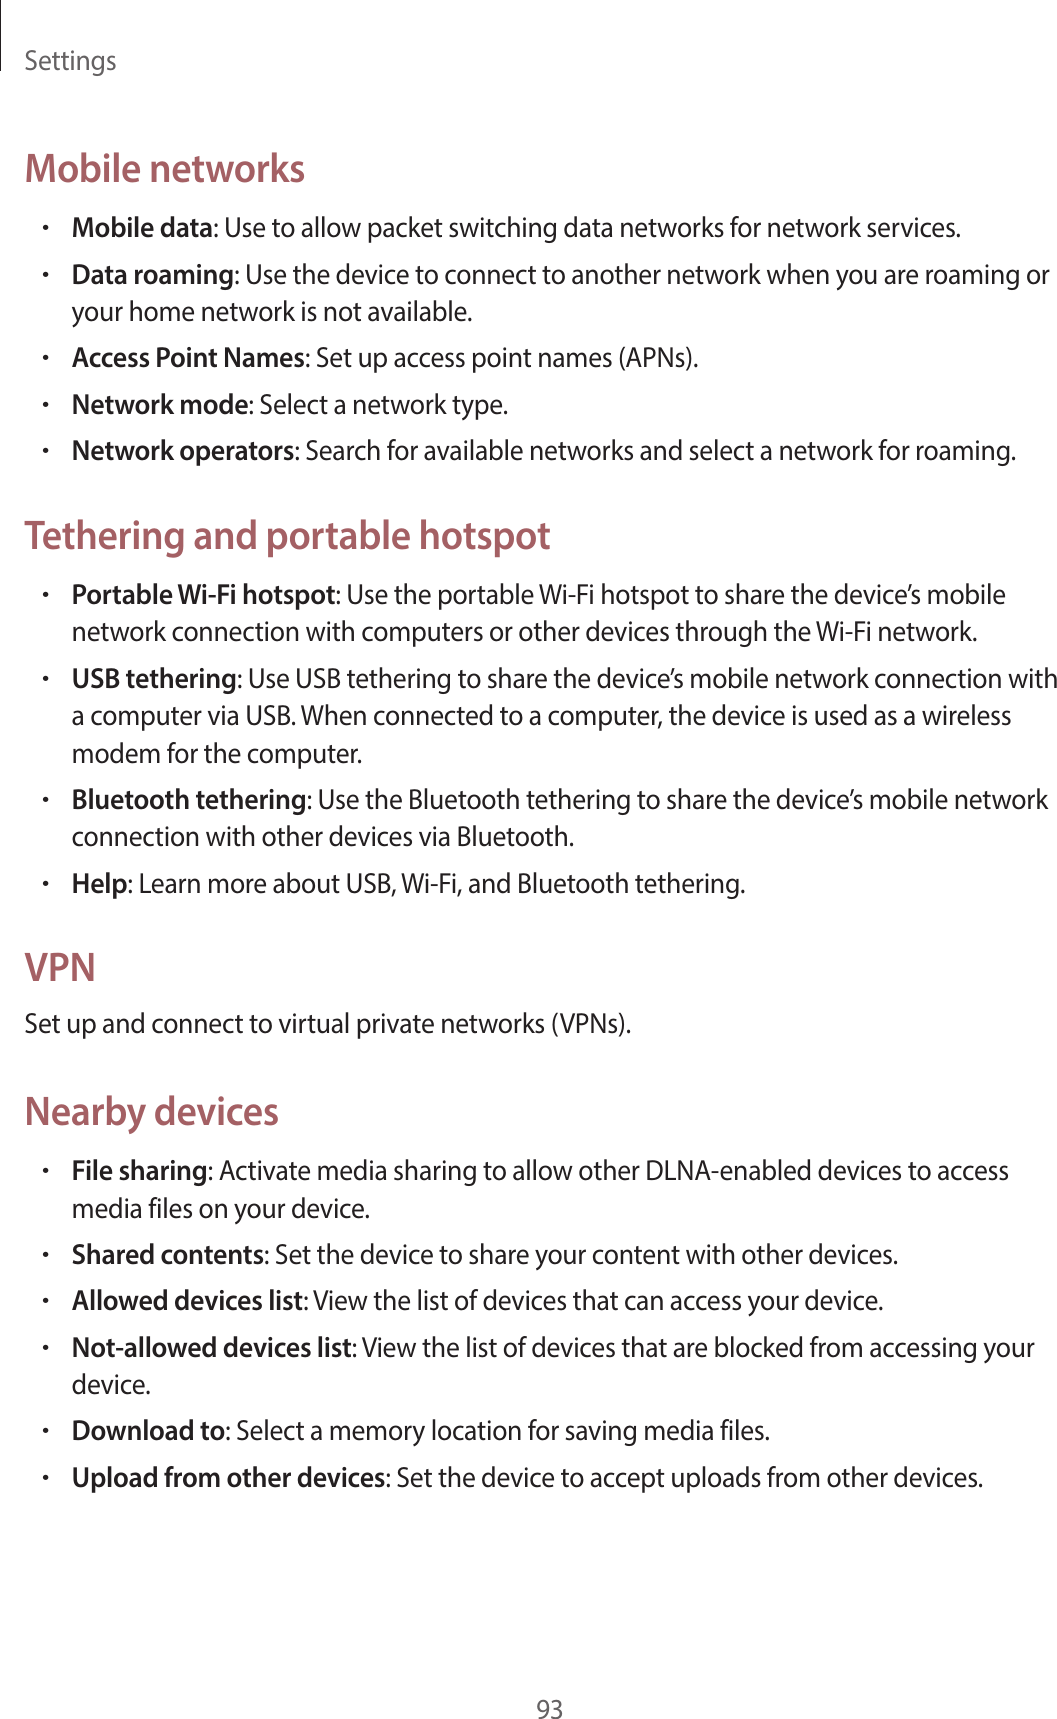 Settings93Mobile networks•Mobile data: Use to allow packet switching data networks for network services.•Data roaming: Use the device to connect to another network when you are roaming or your home network is not available.•Access Point Names: Set up access point names (APNs).•Network mode: Select a network type.•Network operators: Search for available networks and select a network for roaming.Tethering and portable hotspot•Portable Wi-Fi hotspot: Use the portable Wi-Fi hotspot to share the device’s mobile network connection with computers or other devices through the Wi-Fi network.•USB tethering: Use USB tethering to share the device’s mobile network connection with a computer via USB. When connected to a computer, the device is used as a wireless modem for the computer.•Bluetooth tethering: Use the Bluetooth tethering to share the device’s mobile network connection with other devices via Bluetooth.•Help: Learn more about USB, Wi-Fi, and Bluetooth tethering.VPNSet up and connect to virtual private networks (VPNs).Nearby devices•File sharing: Activate media sharing to allow other DLNA-enabled devices to access media files on your device.•Shared contents: Set the device to share your content with other devices.•Allowed devices list: View the list of devices that can access your device.•Not-allowed devices list: View the list of devices that are blocked from accessing your device.•Download to: Select a memory location for saving media files.•Upload from other devices: Set the device to accept uploads from other devices.